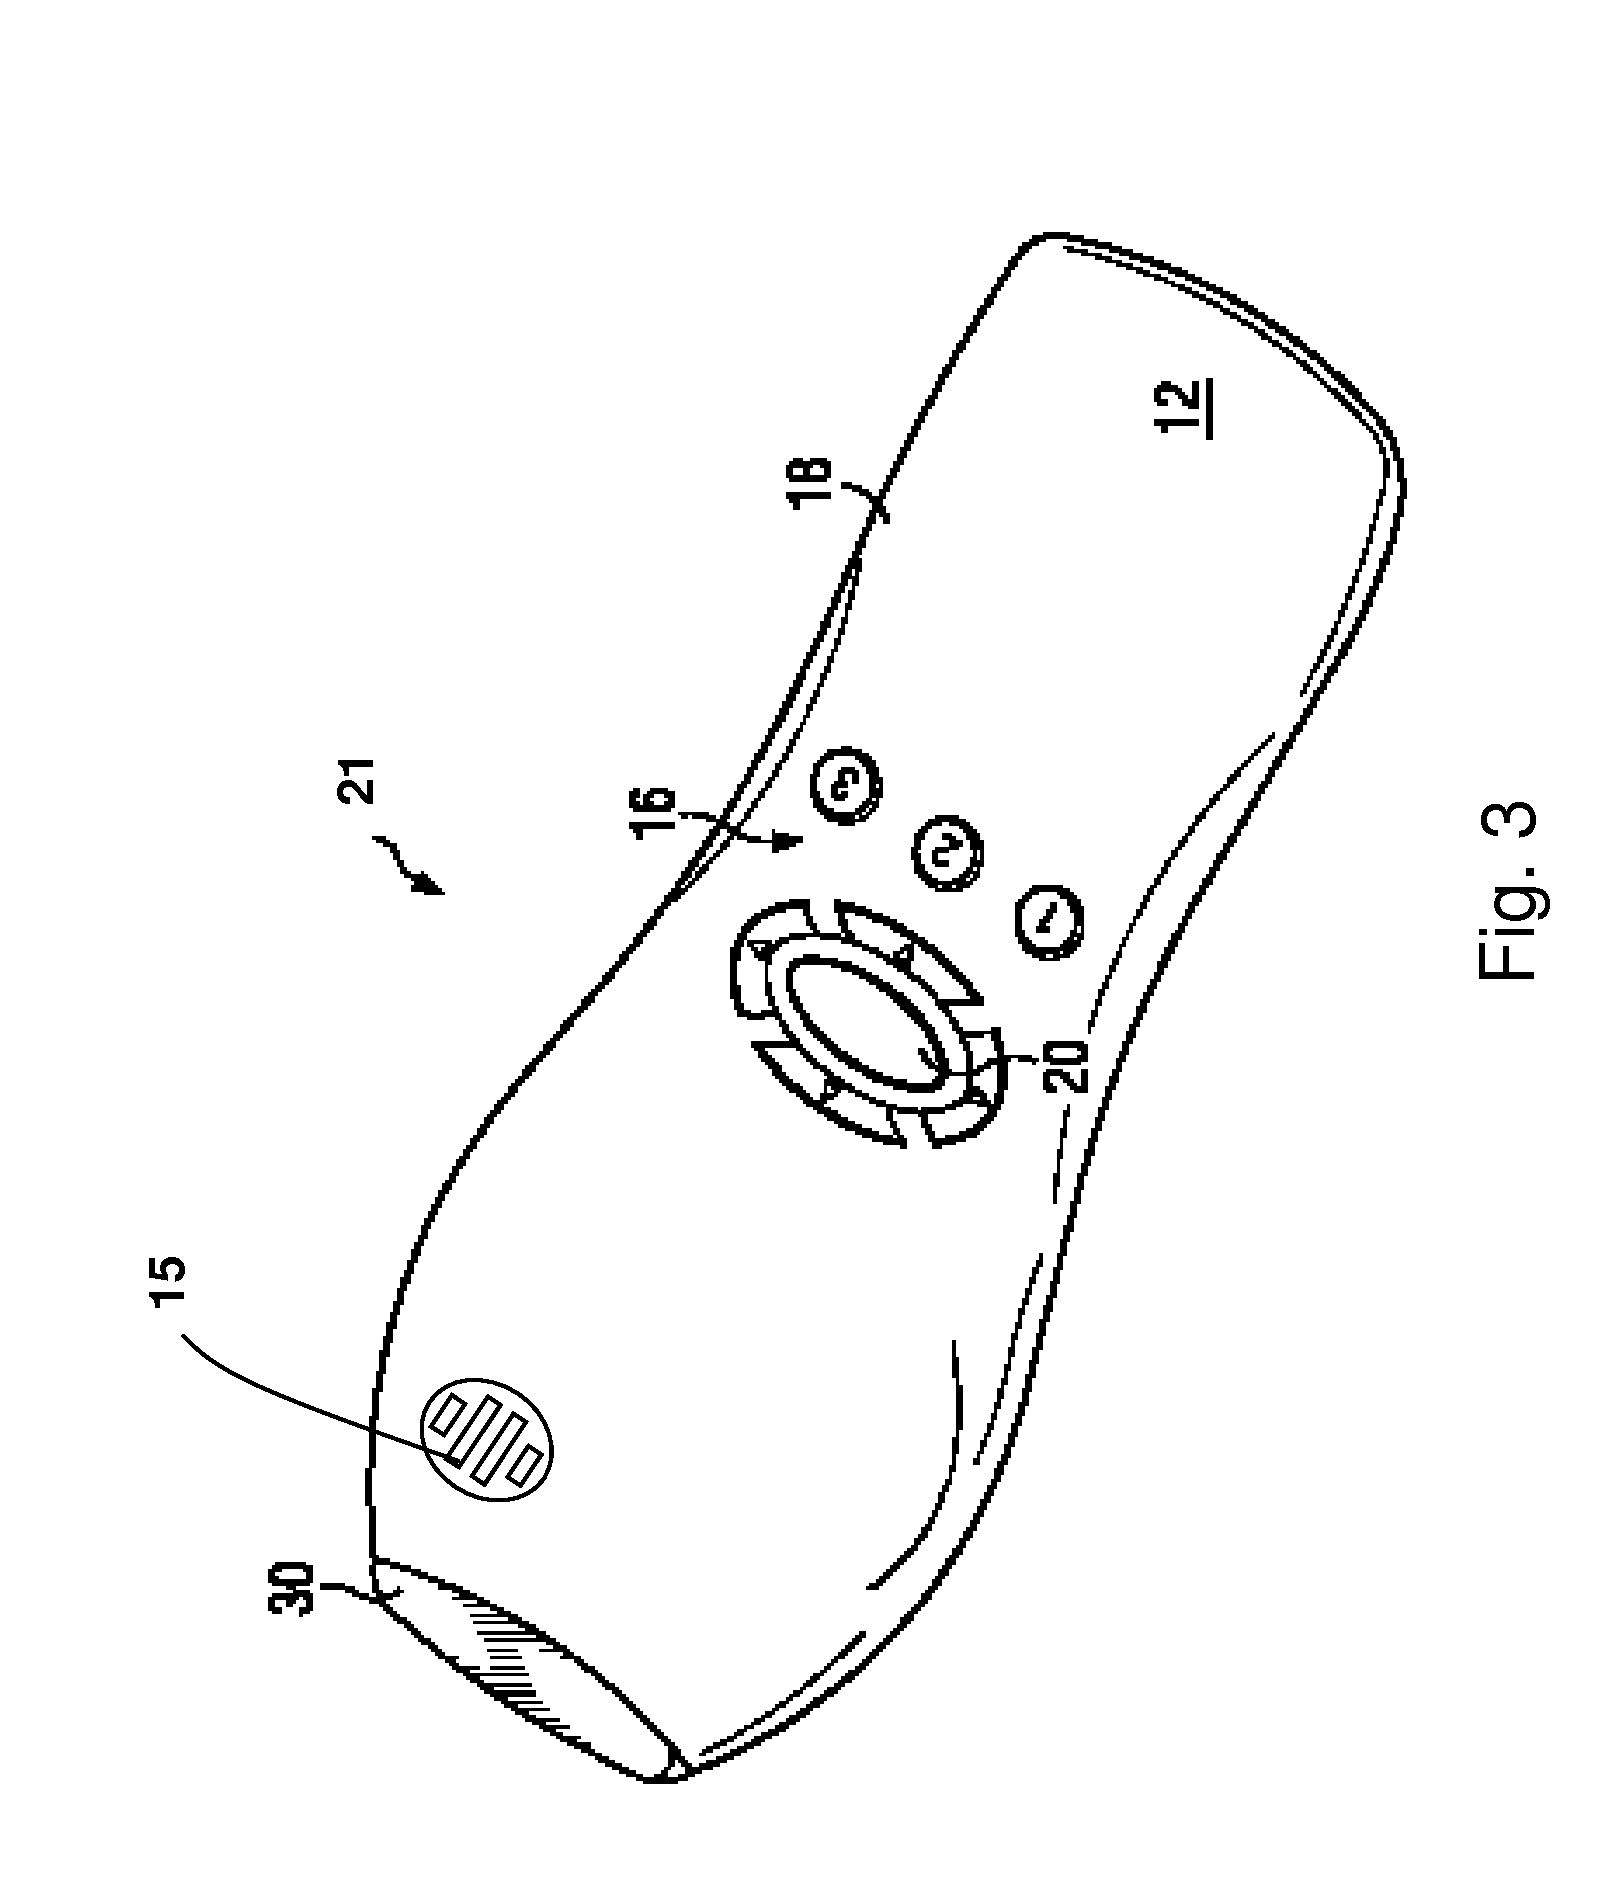 Therapeutic pulse laser methods and apparatus